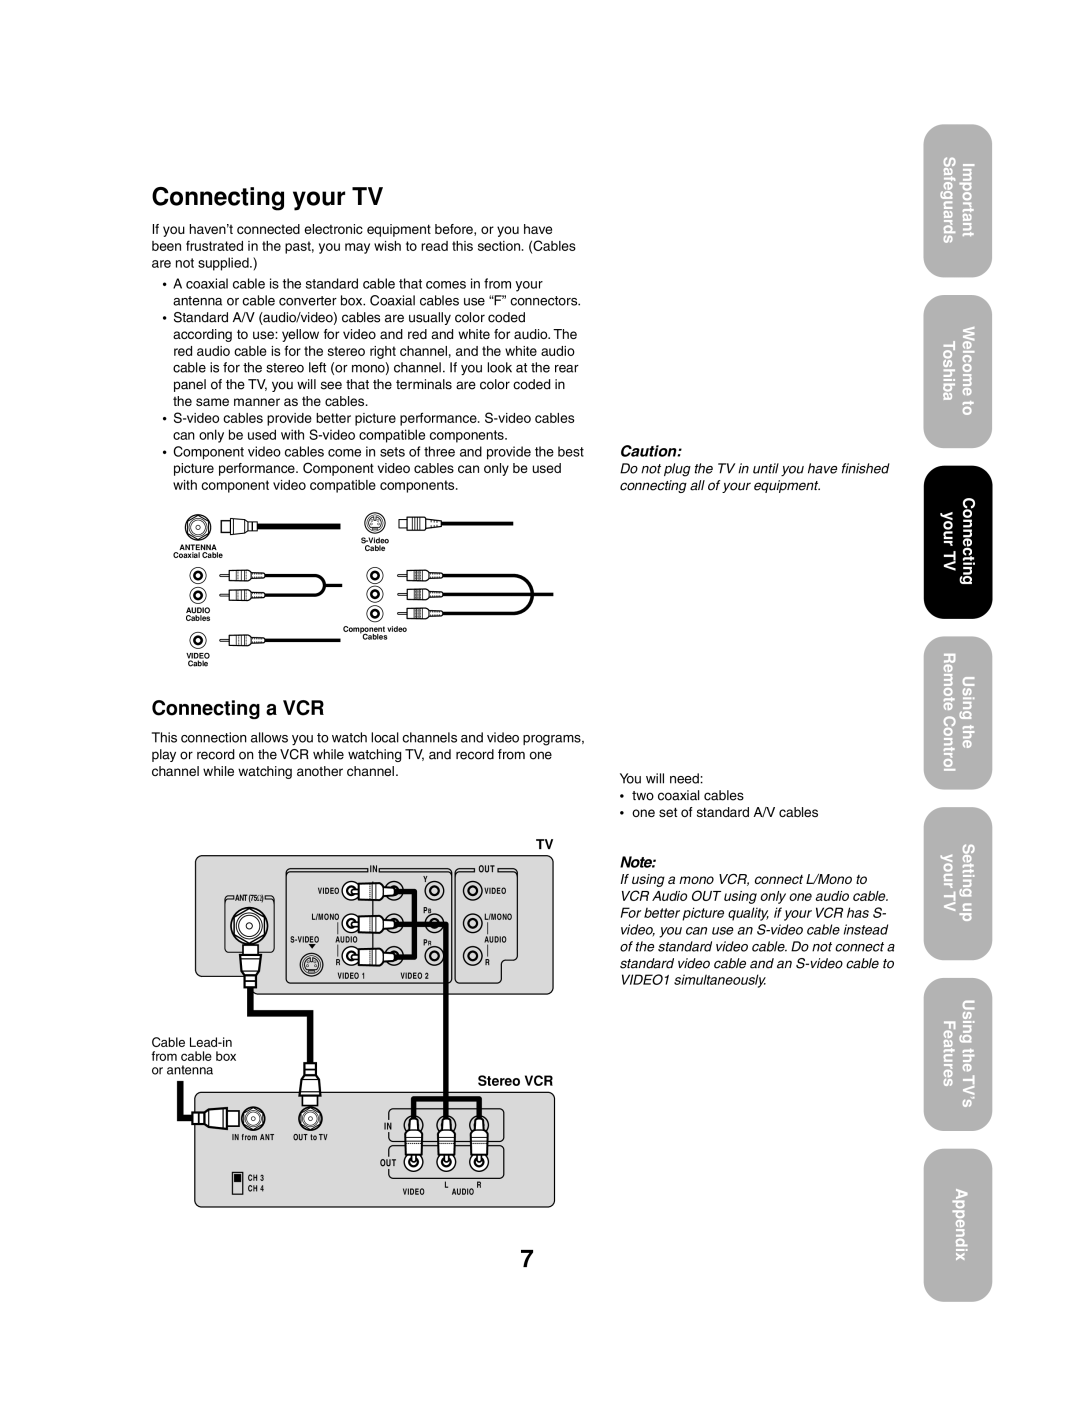 Toshiba 27AF53 appendix Connecting your TV, Connecting a VCR, With component video compatible components, Stereo VCR 